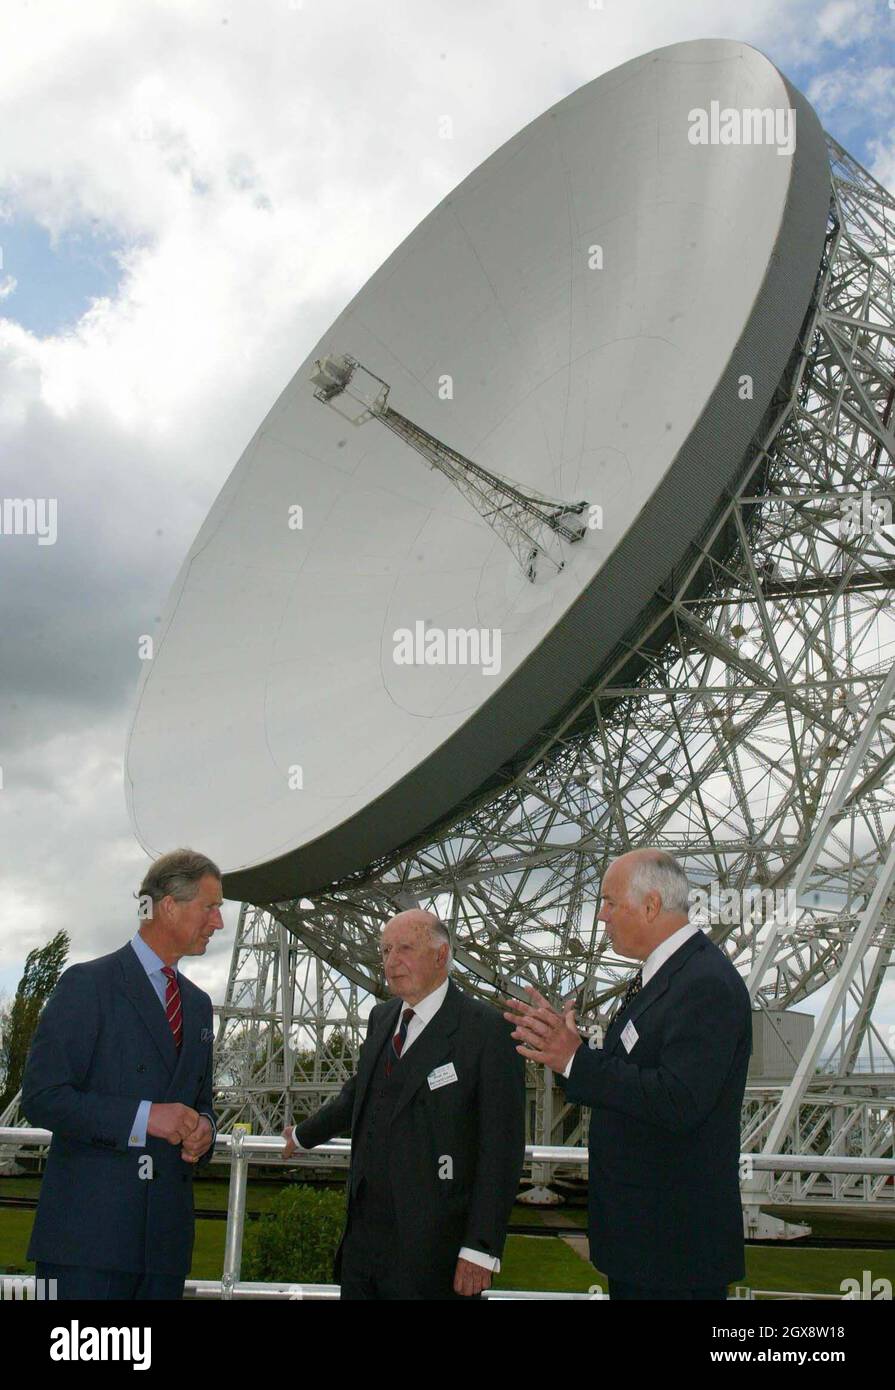 The Prince of Wales speaks with Sir Bernard Lovell (C) and Prof Andrew Lyne (R) during a visit to the Jodrell Bank Observatory in Cheshire. Half length, royals, suit  Â©Anwar Hussein/allaction.co.uk  Stock Photo